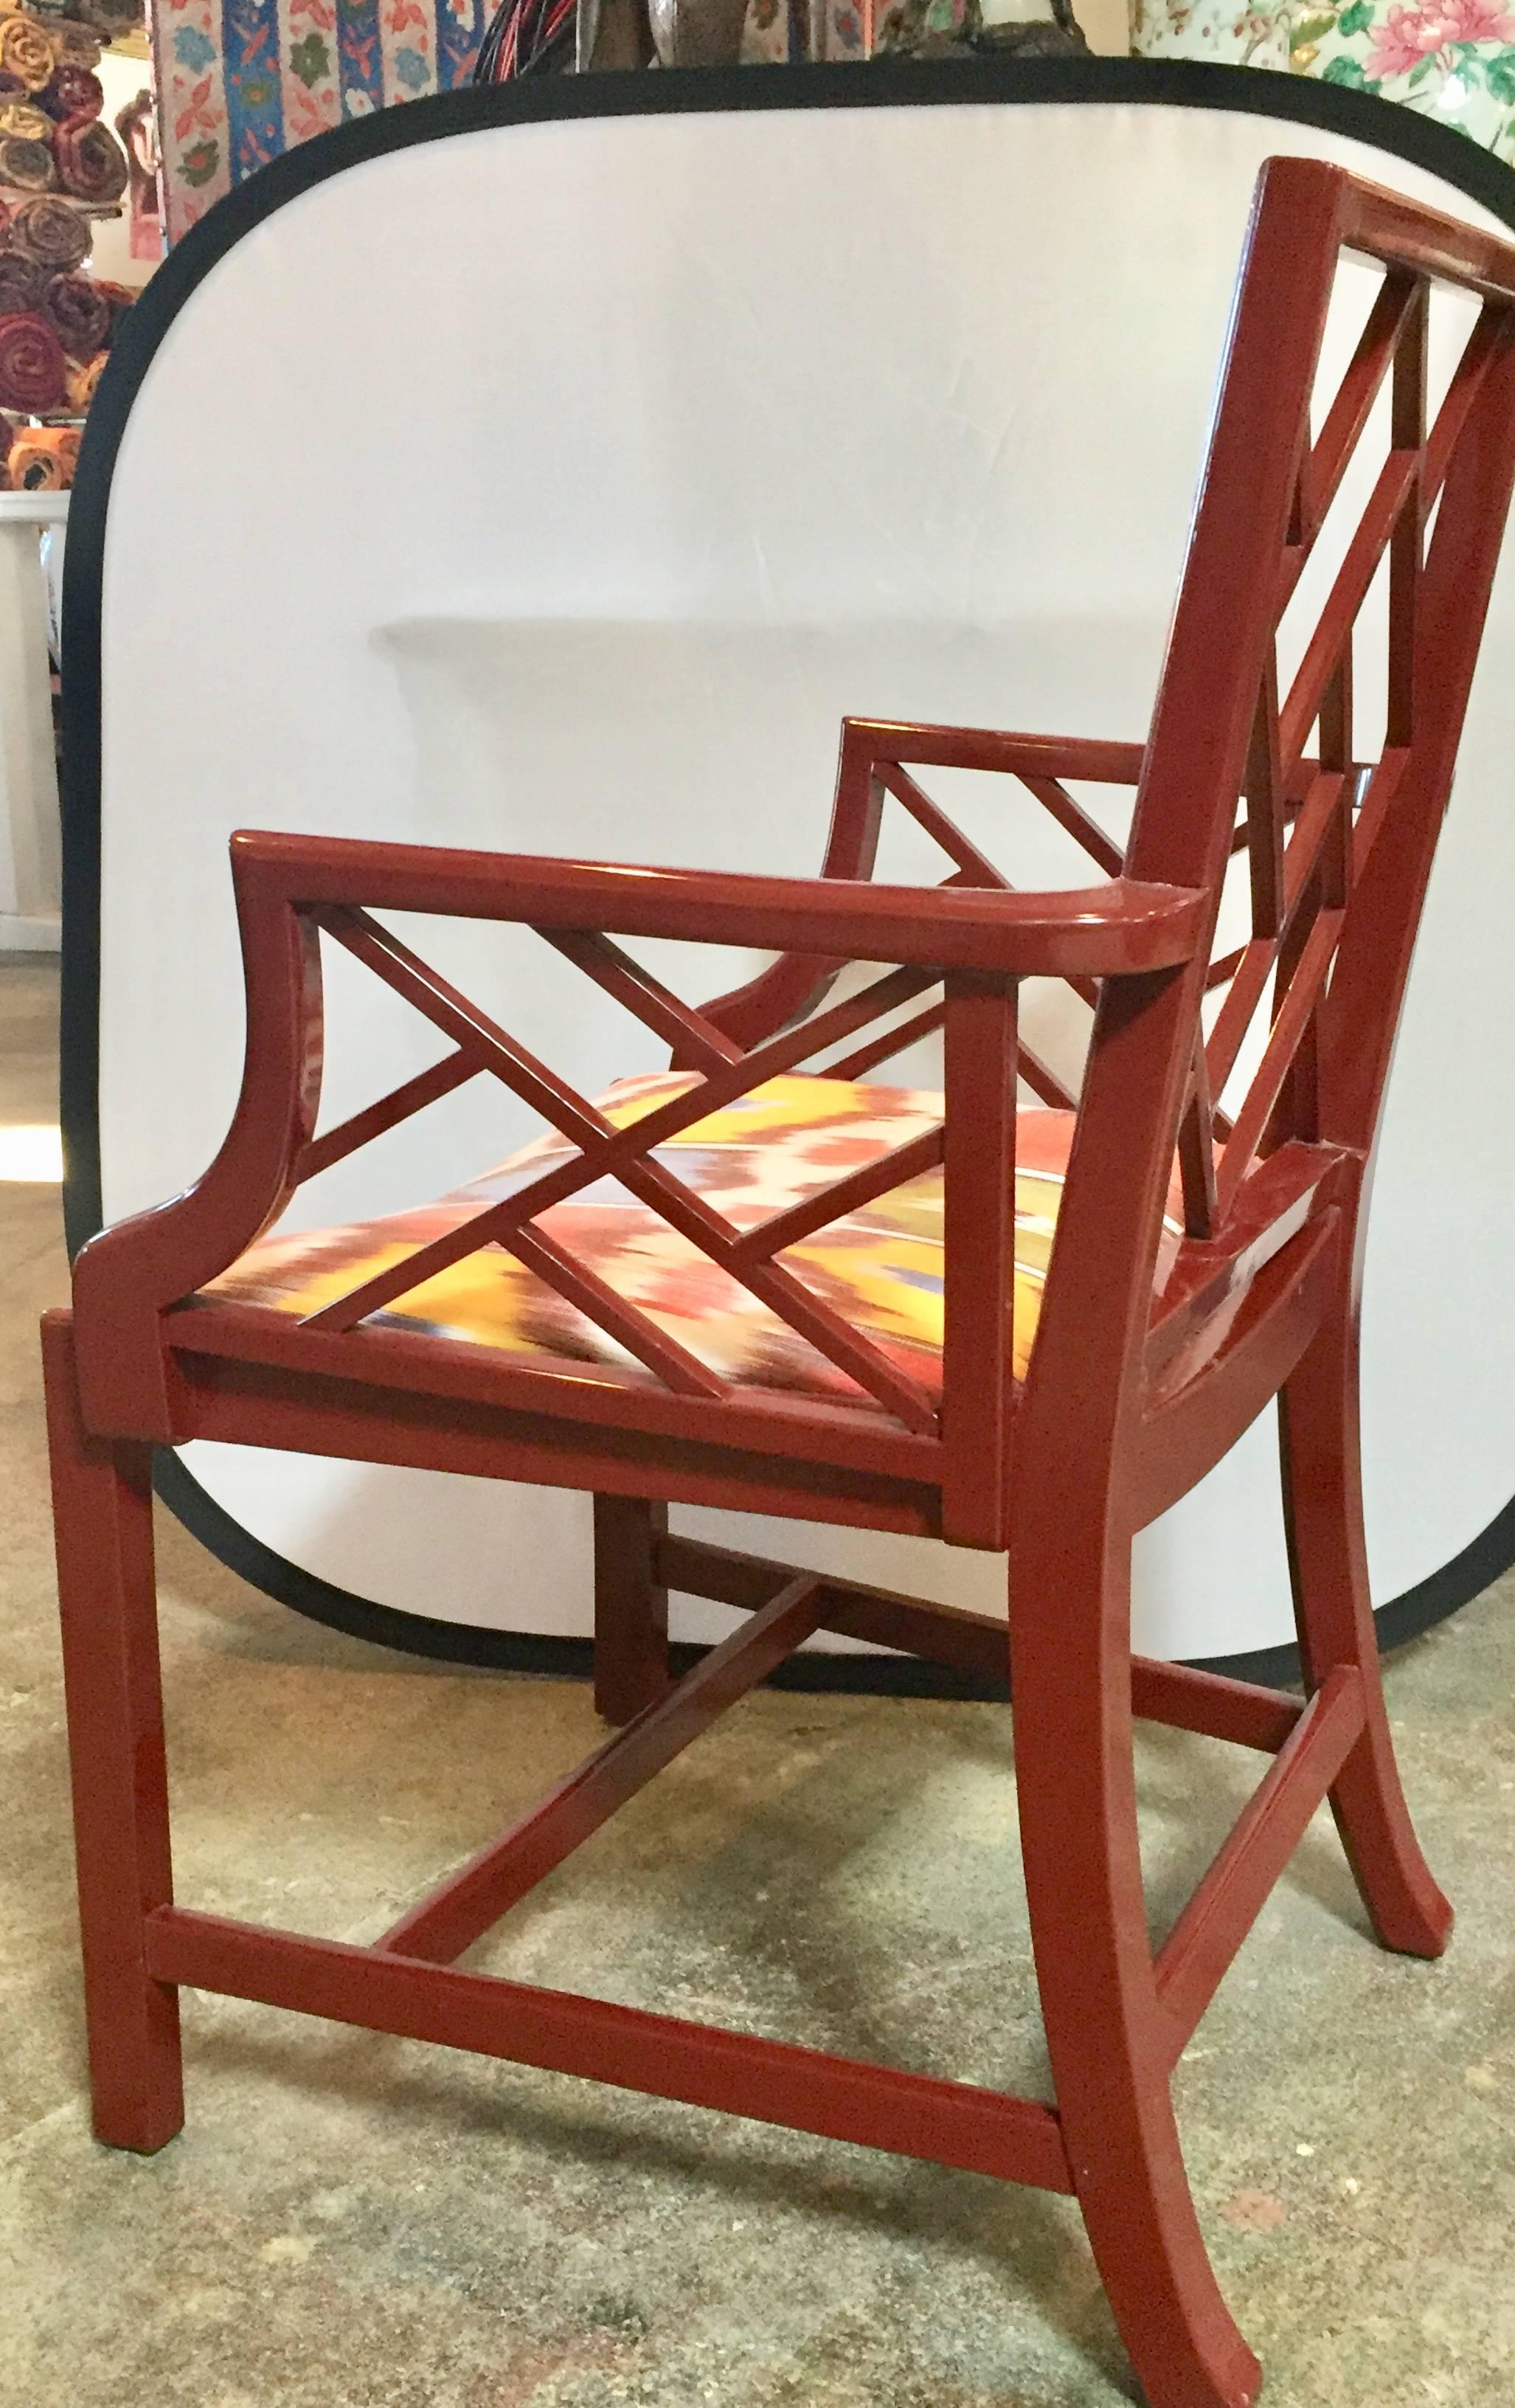 Chinese Chippendale chair with hand-loomed silk Ikat seat, lacquered in cinnabar.